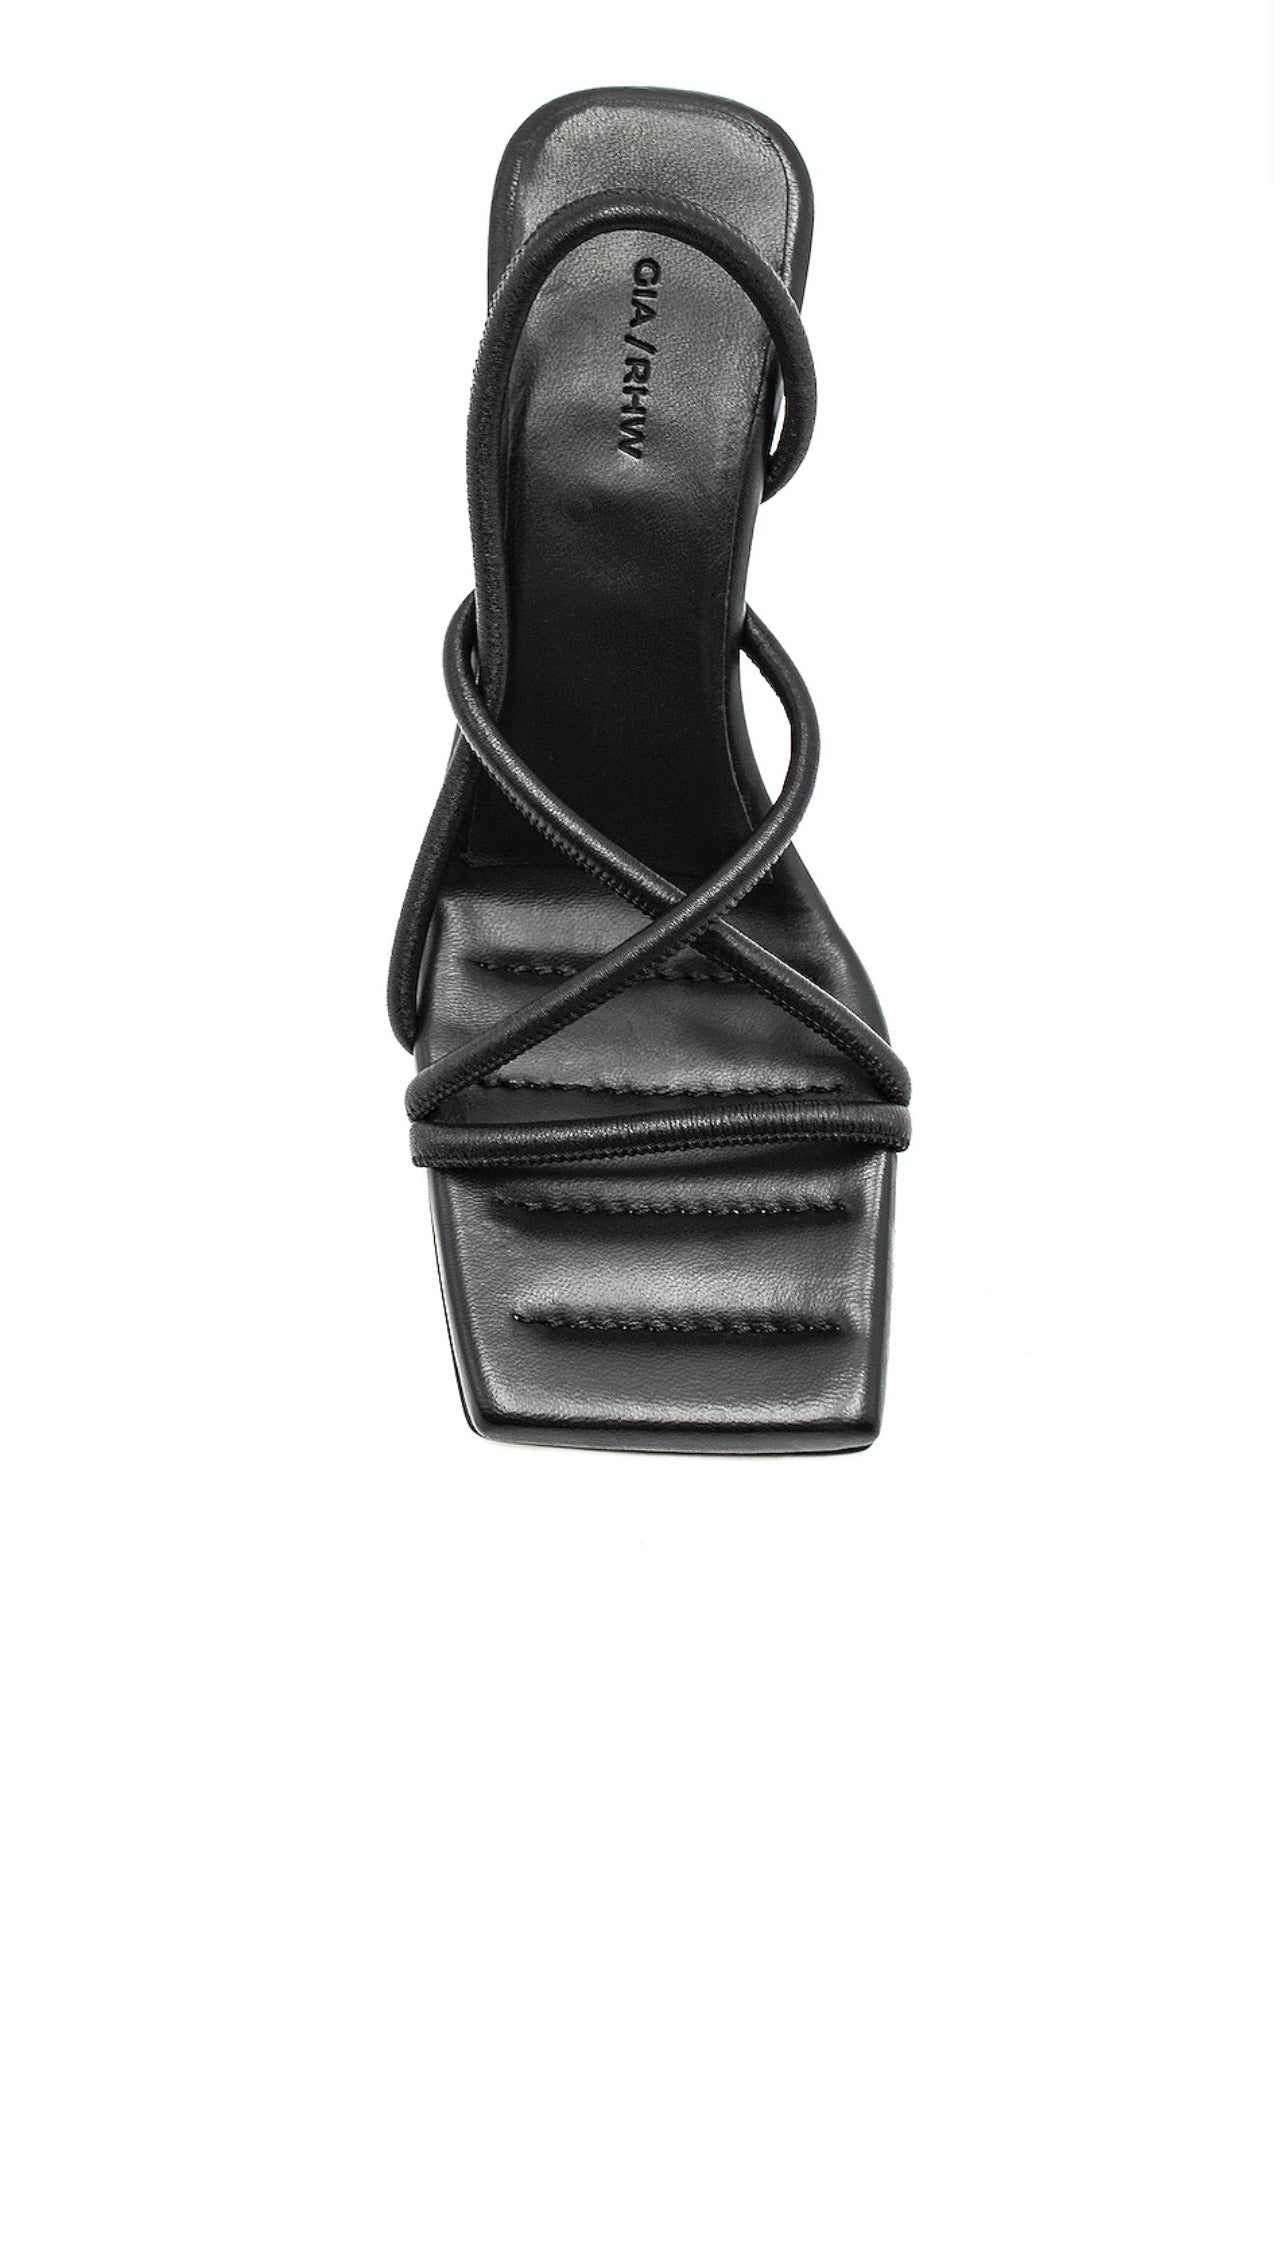 Gia x RHW - leather strapped sandal in black